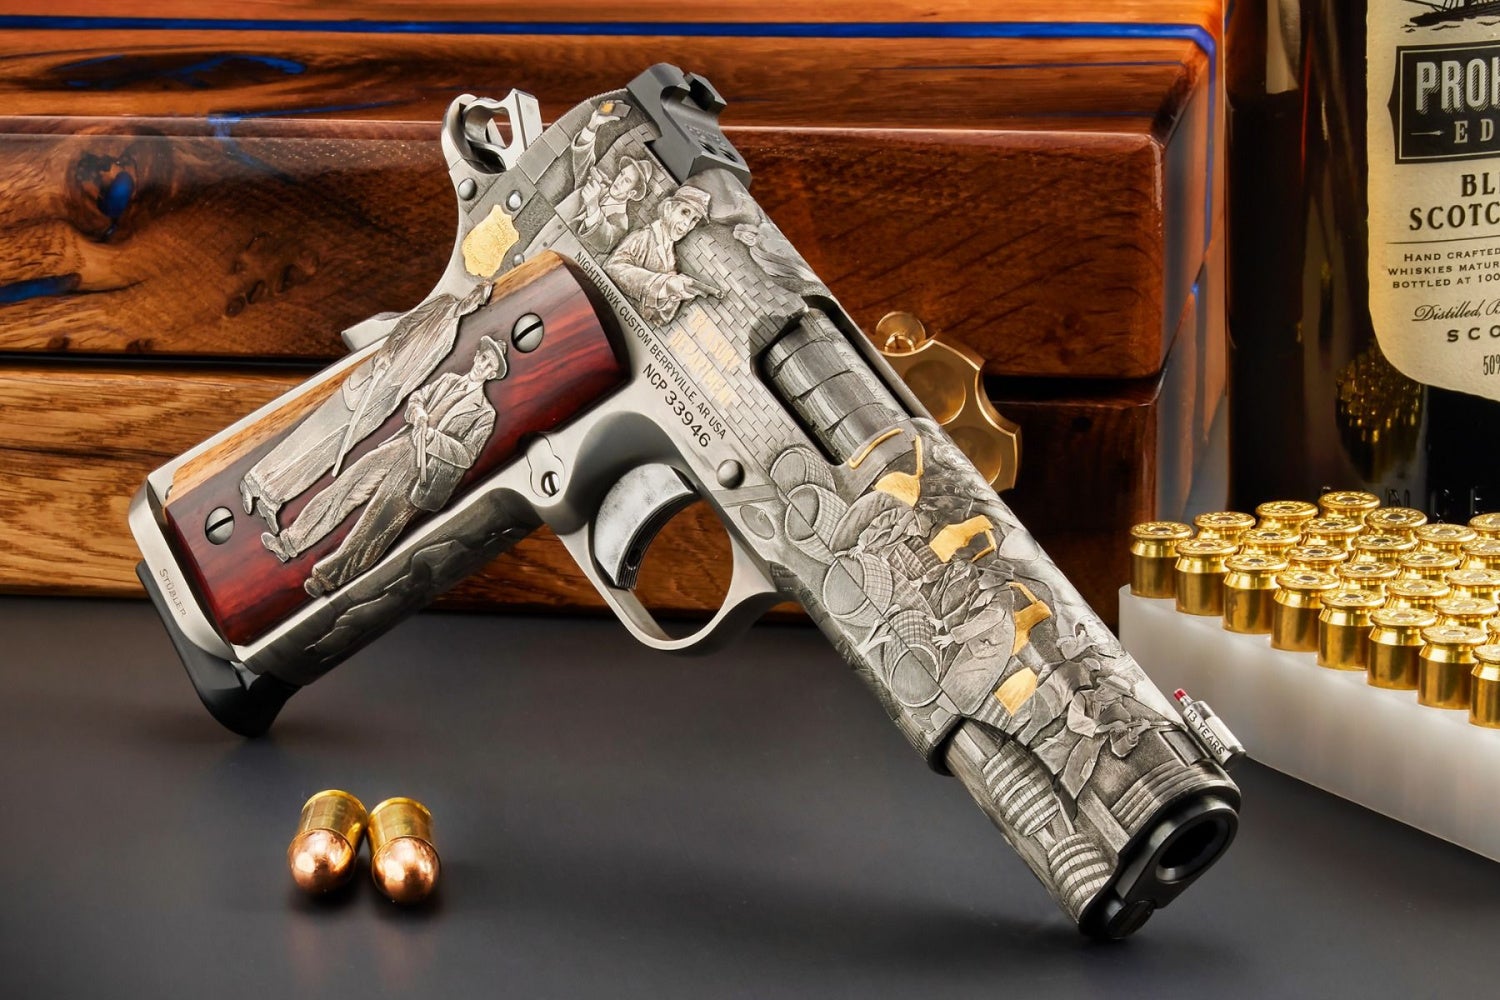 The Prohibition Engraved 1911 from Nighthawk Custom